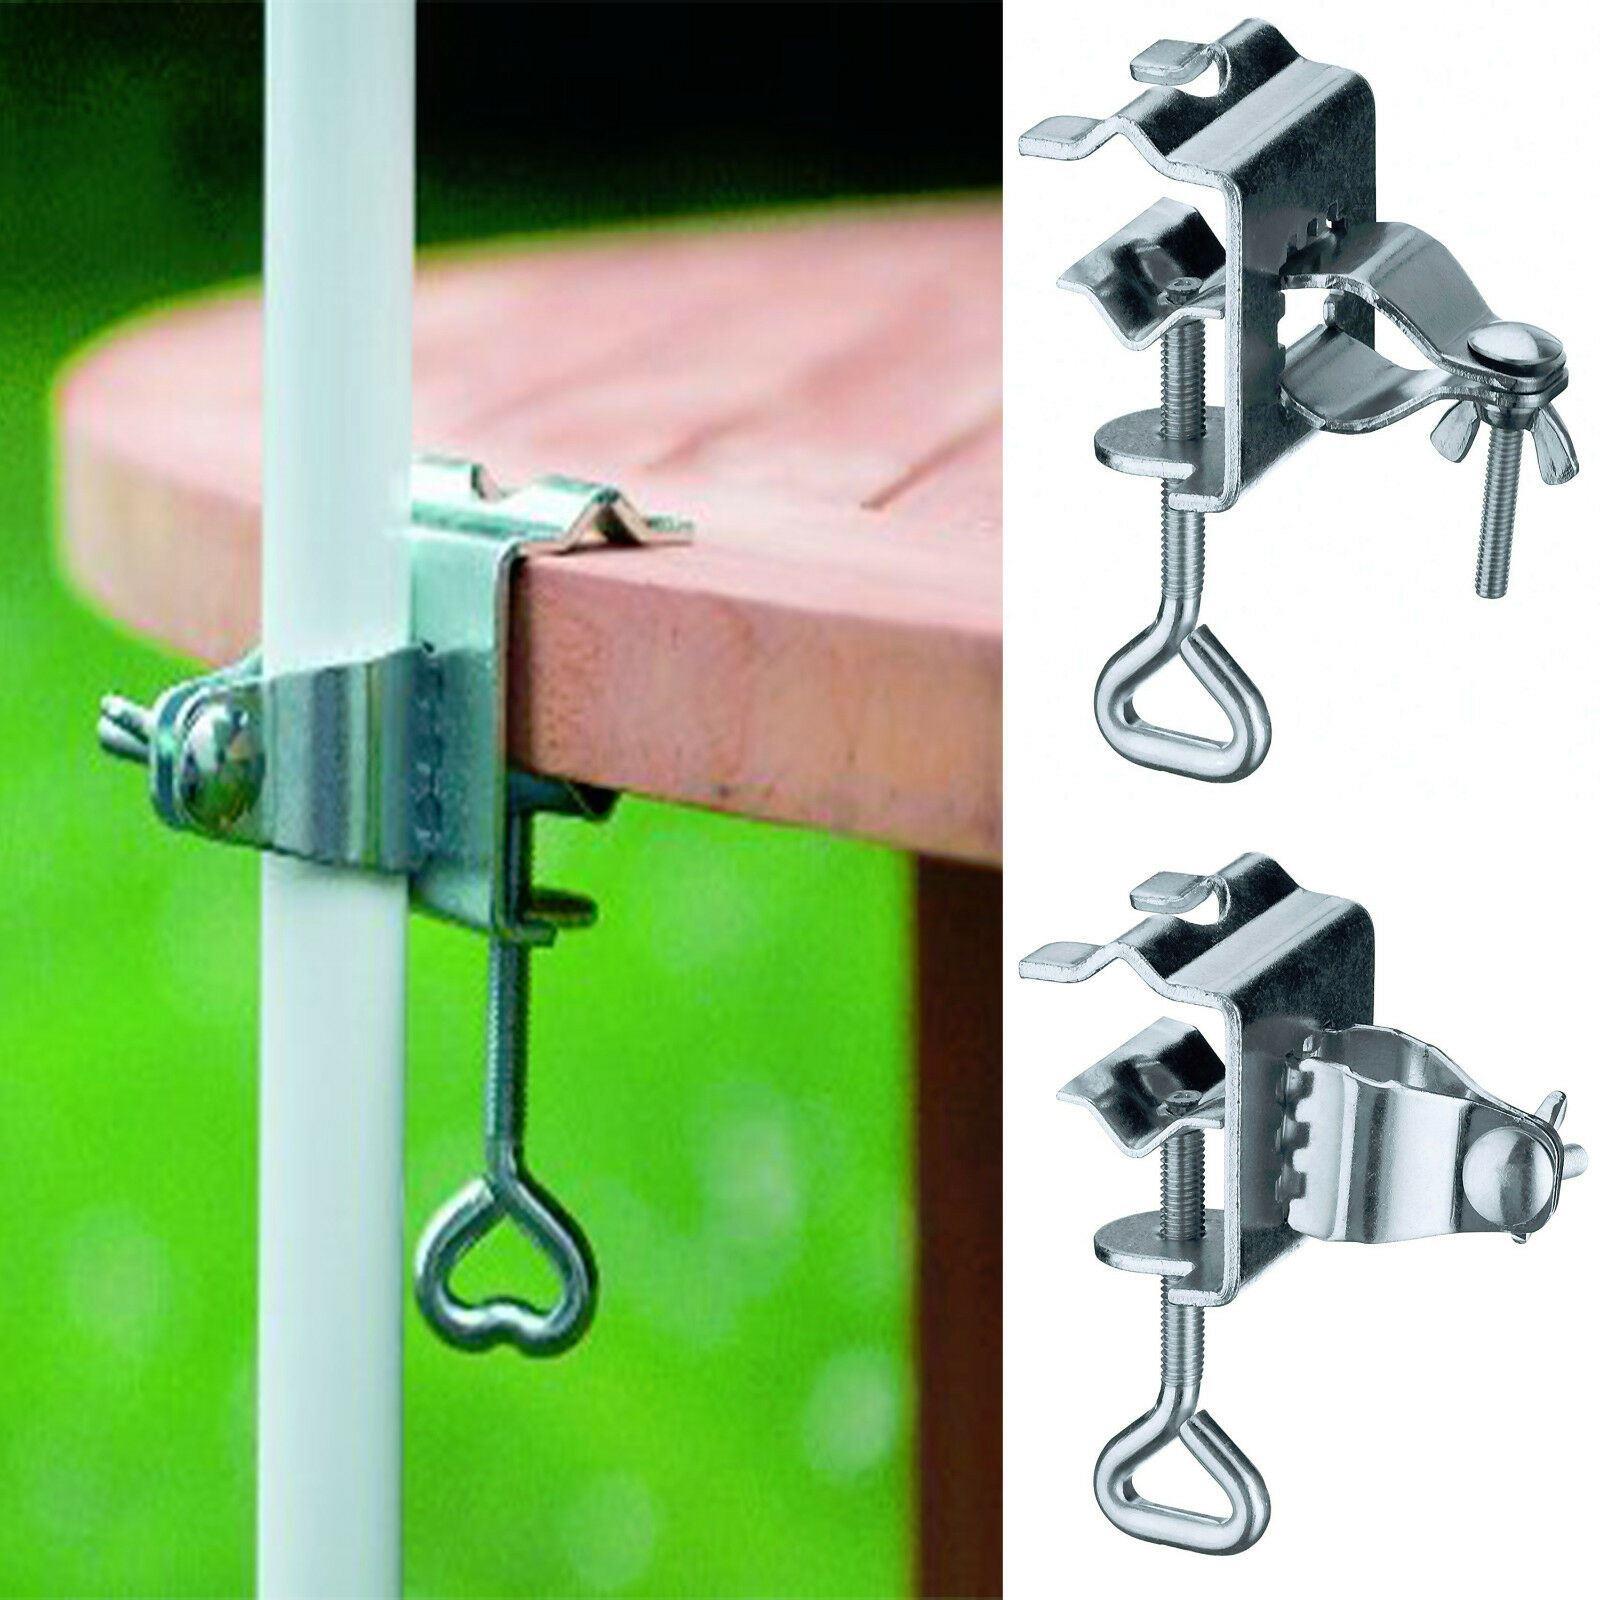 Table Parasol Clamp by GEEZY - The Magic Toy Shop